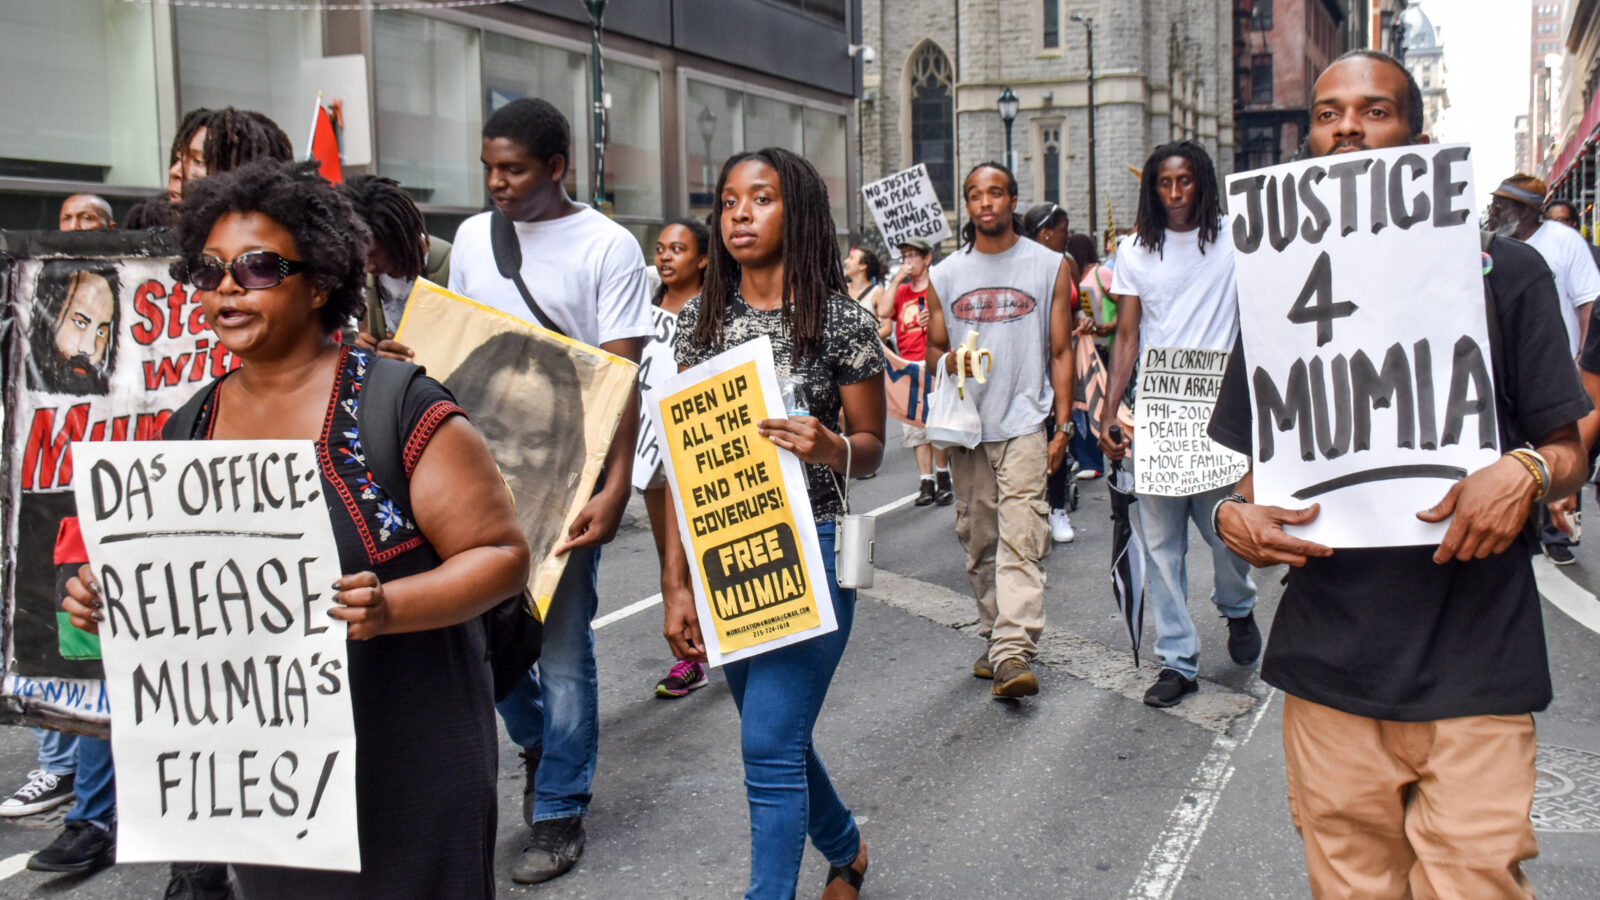 Campaign to Bring Mumia Home